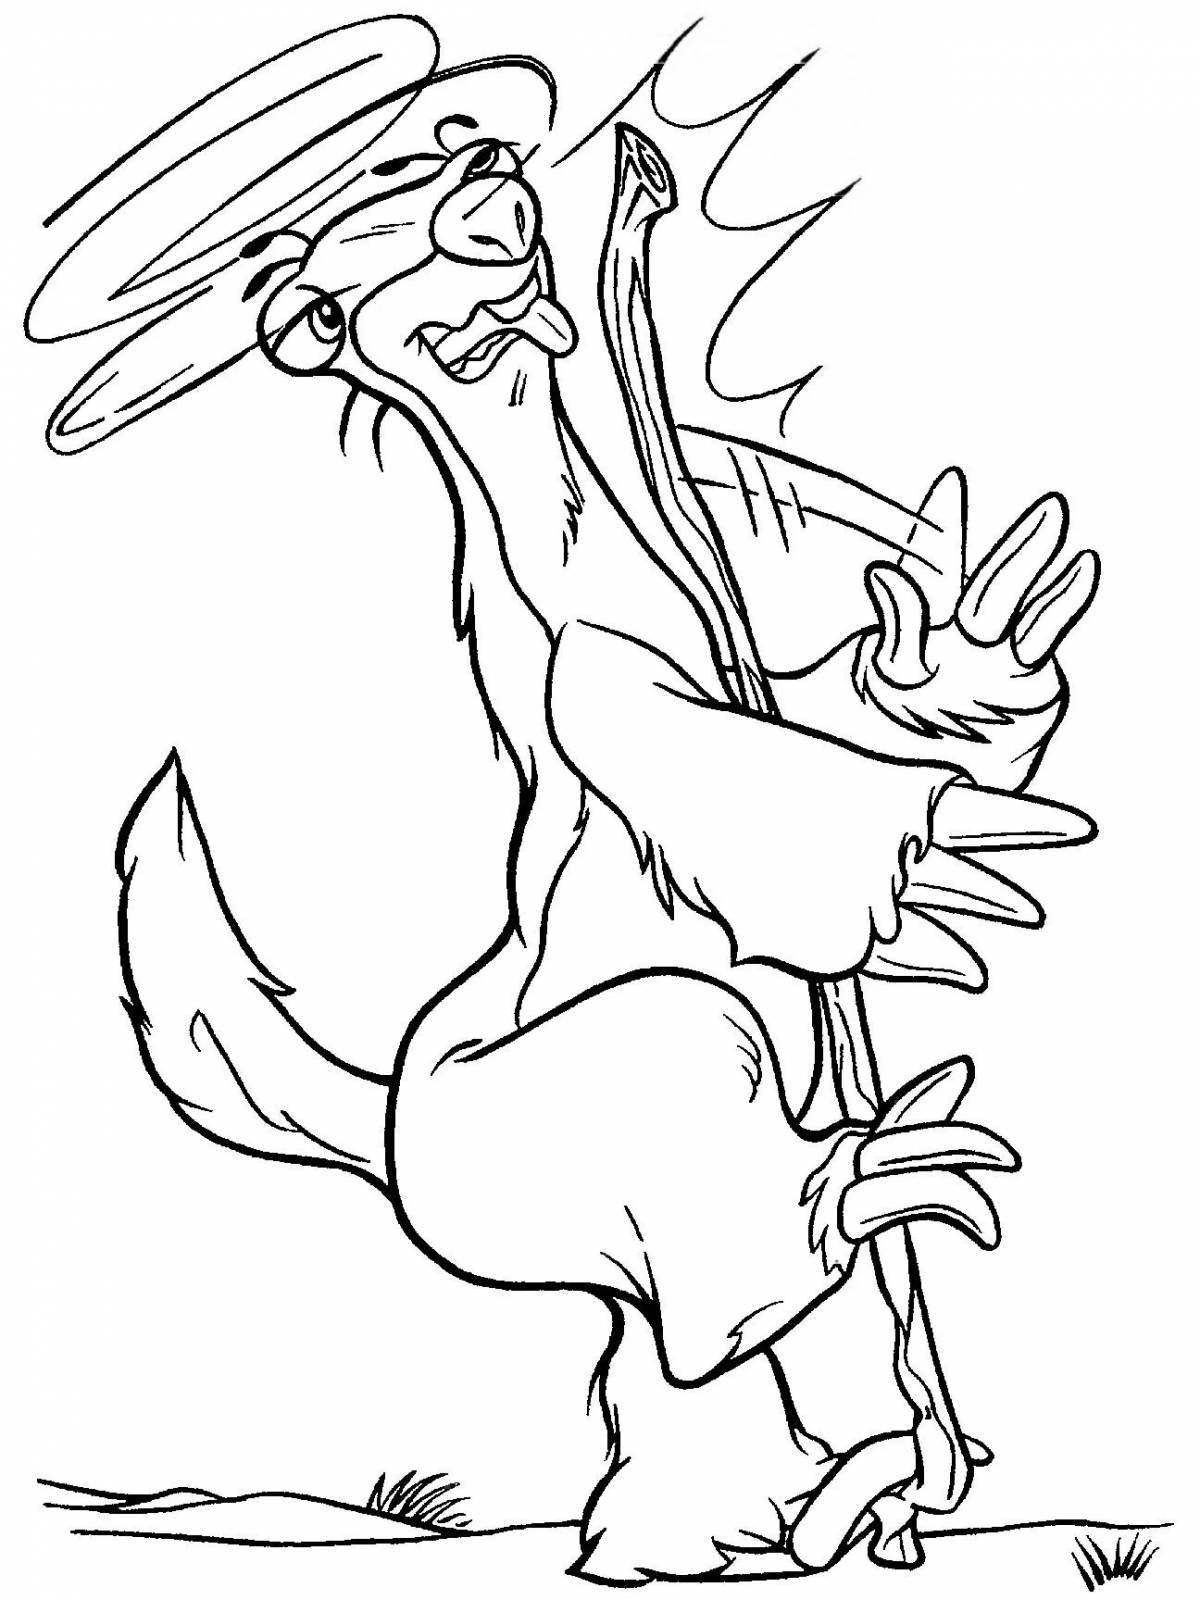 Adorable ice age coloring page